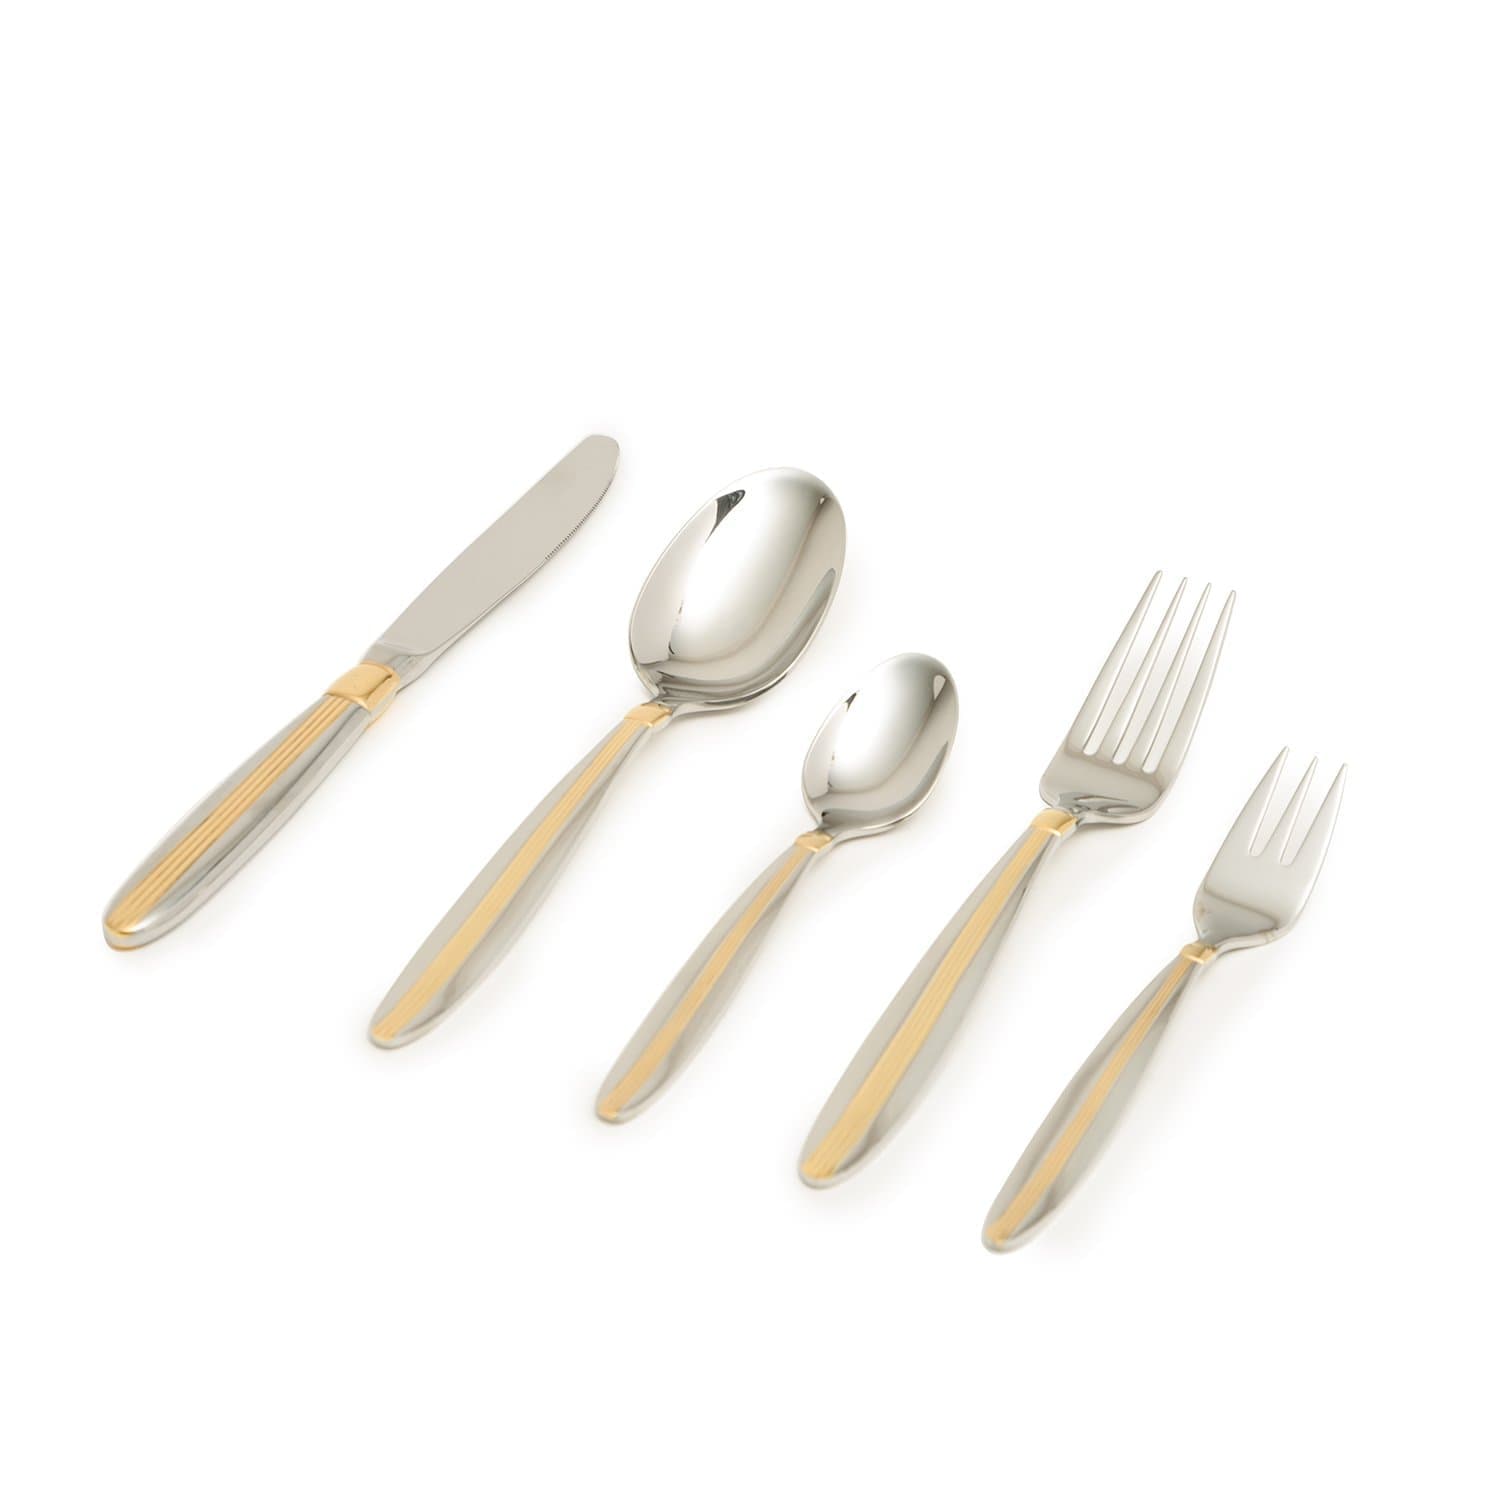 JIMMIE ONE SIDE GOLDPLATED 68PC CUTLERY SET - GL226/GPBX